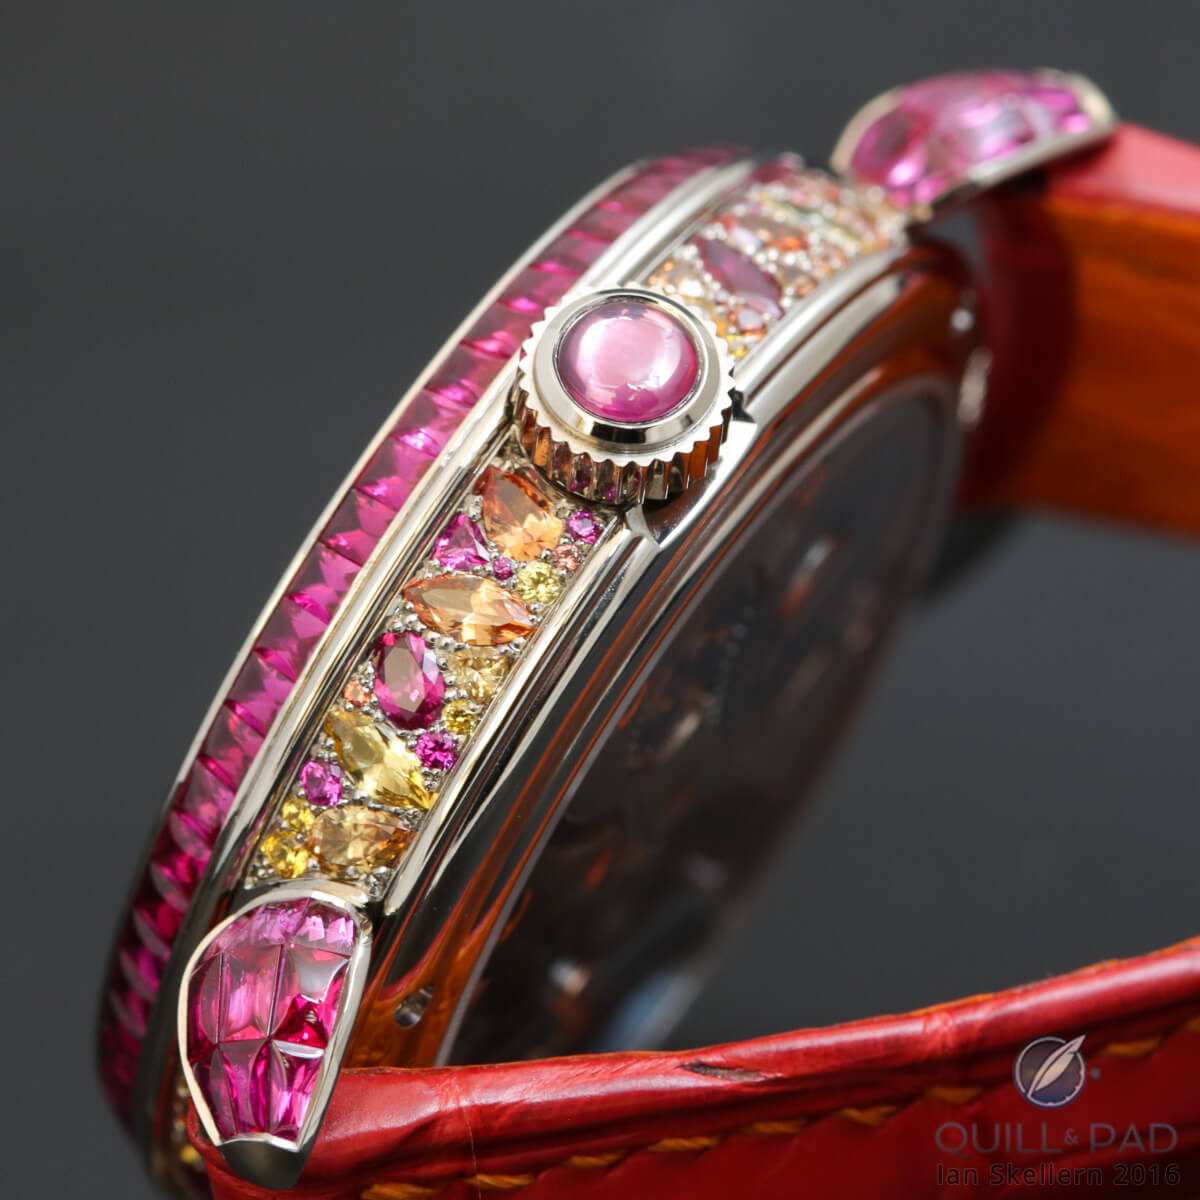 Intricately and colorfully gem set case band of the Voutilainen Scintillante